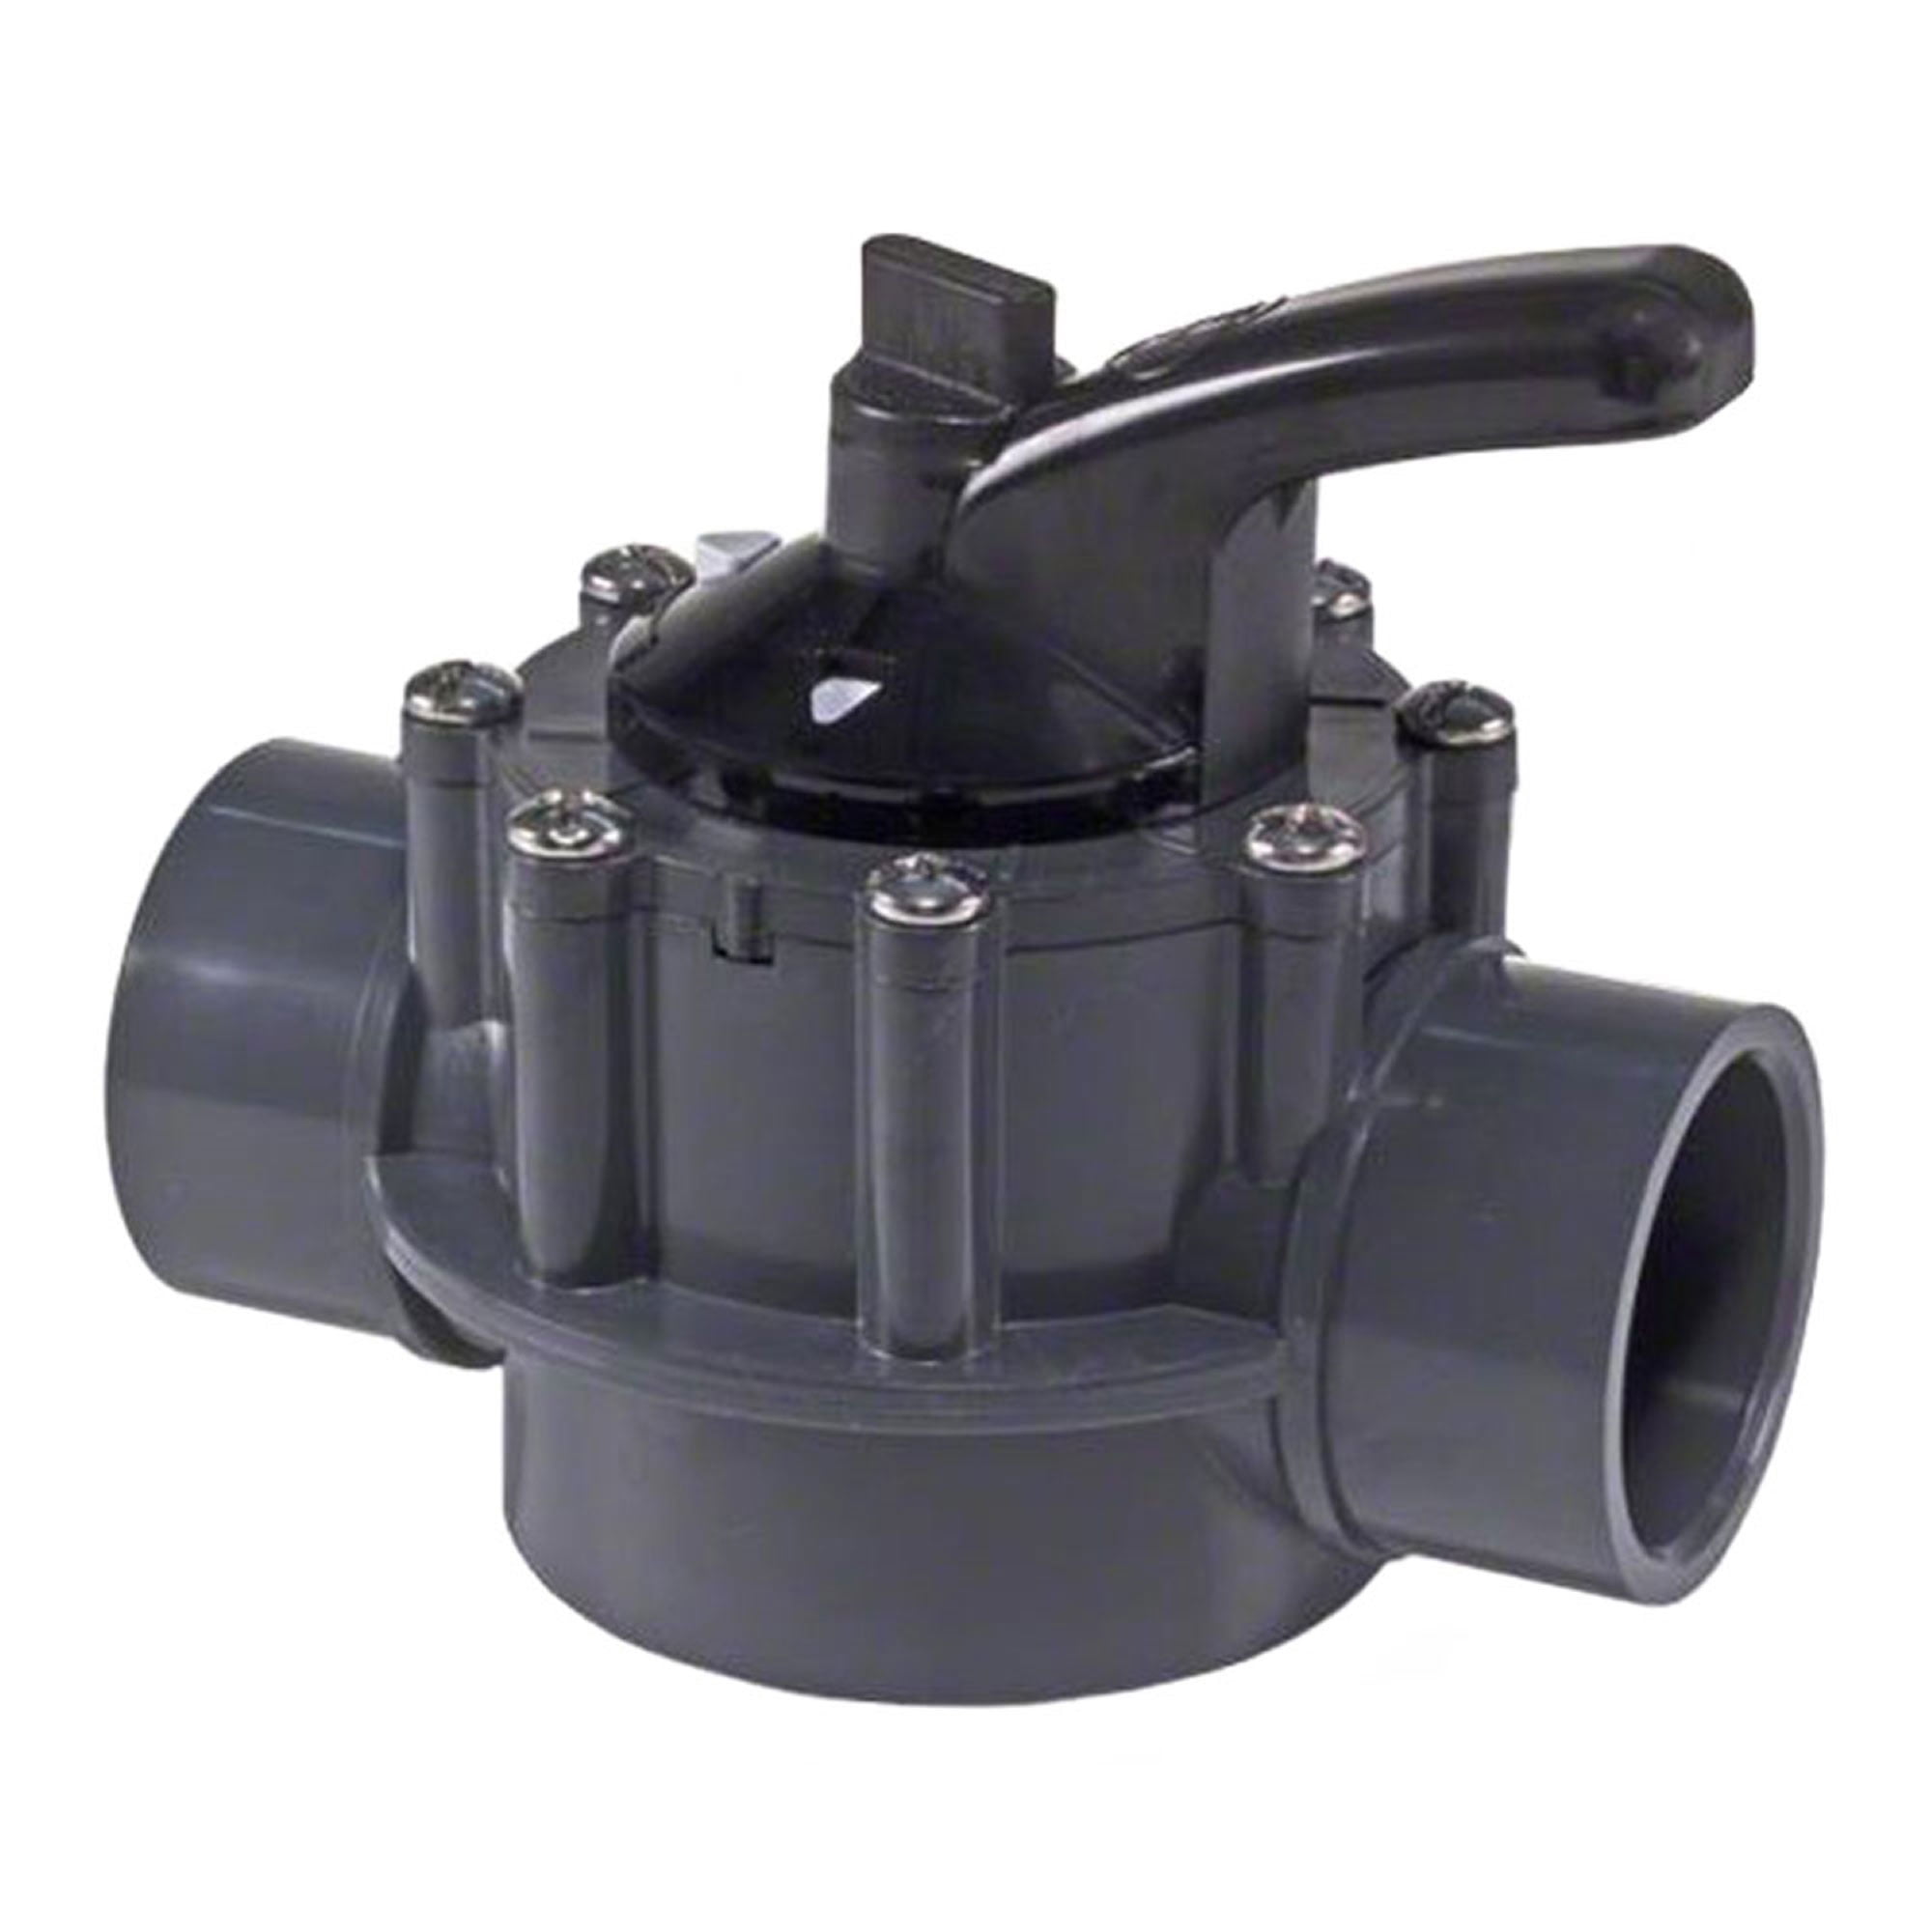 Pentair 263042 2 Port Straight Check Valve CPVC for Pool Pumps for sale online 